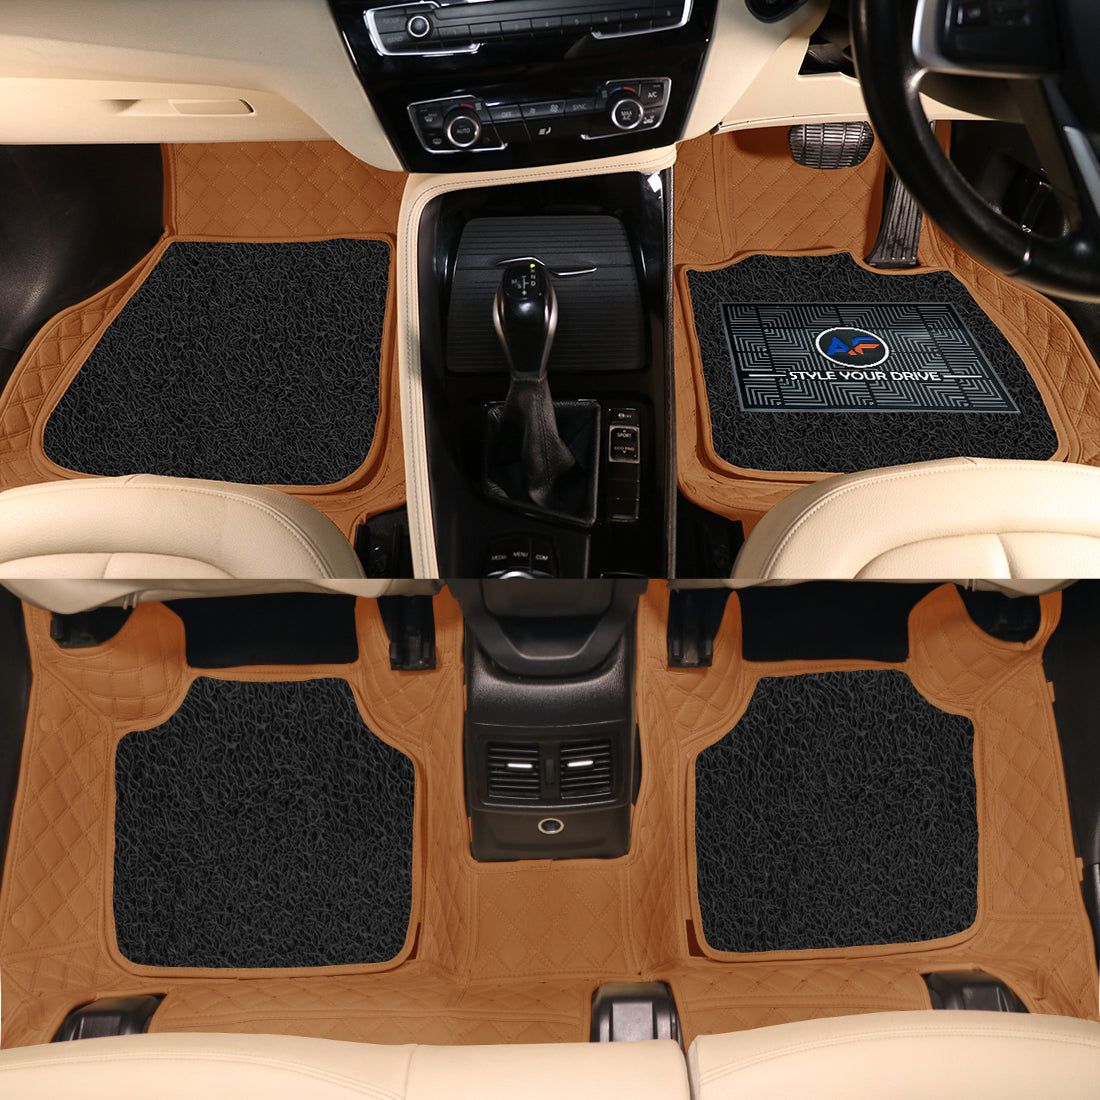 Volvo XC90 Excellence 2019 7D Luxury Car Mat, All Weather Proof, Anti-Skid, 100% Waterproof & Odorless with Unique Diamond Fish Design (24mm Luxury PU Leather, 2 Rows)